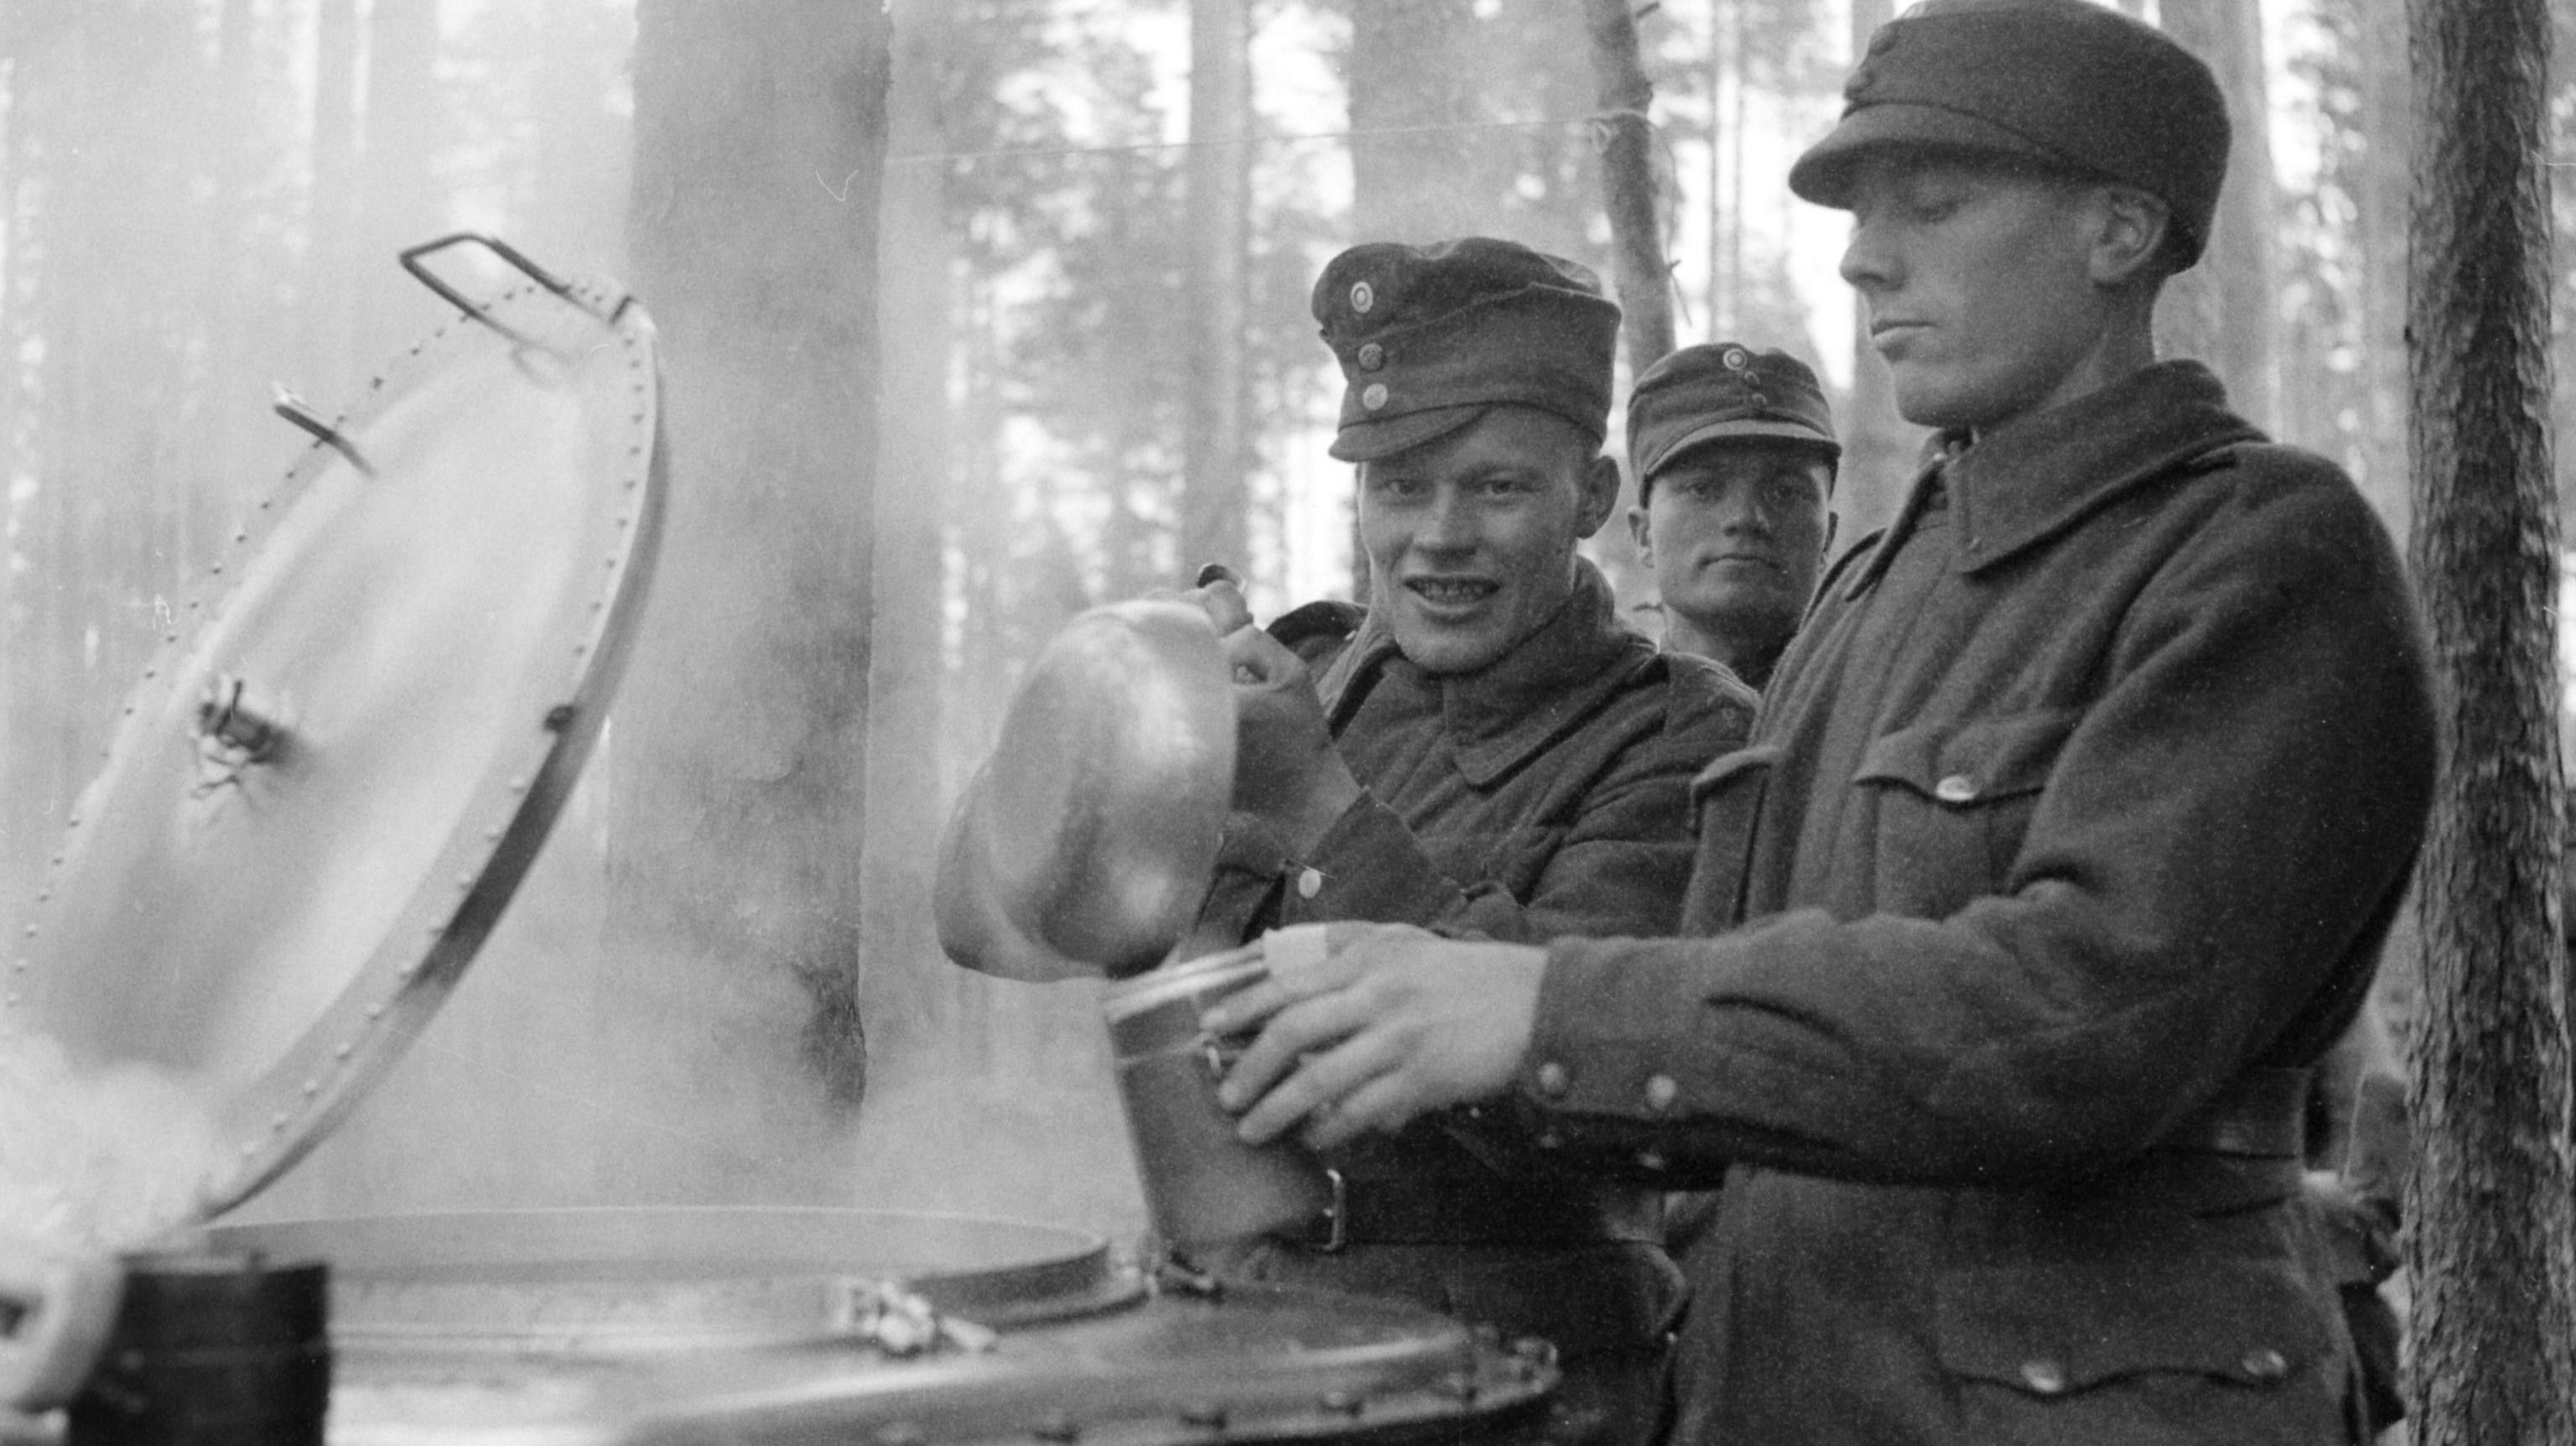 Ukraine should take a page out of Finland’s fight with Stalin